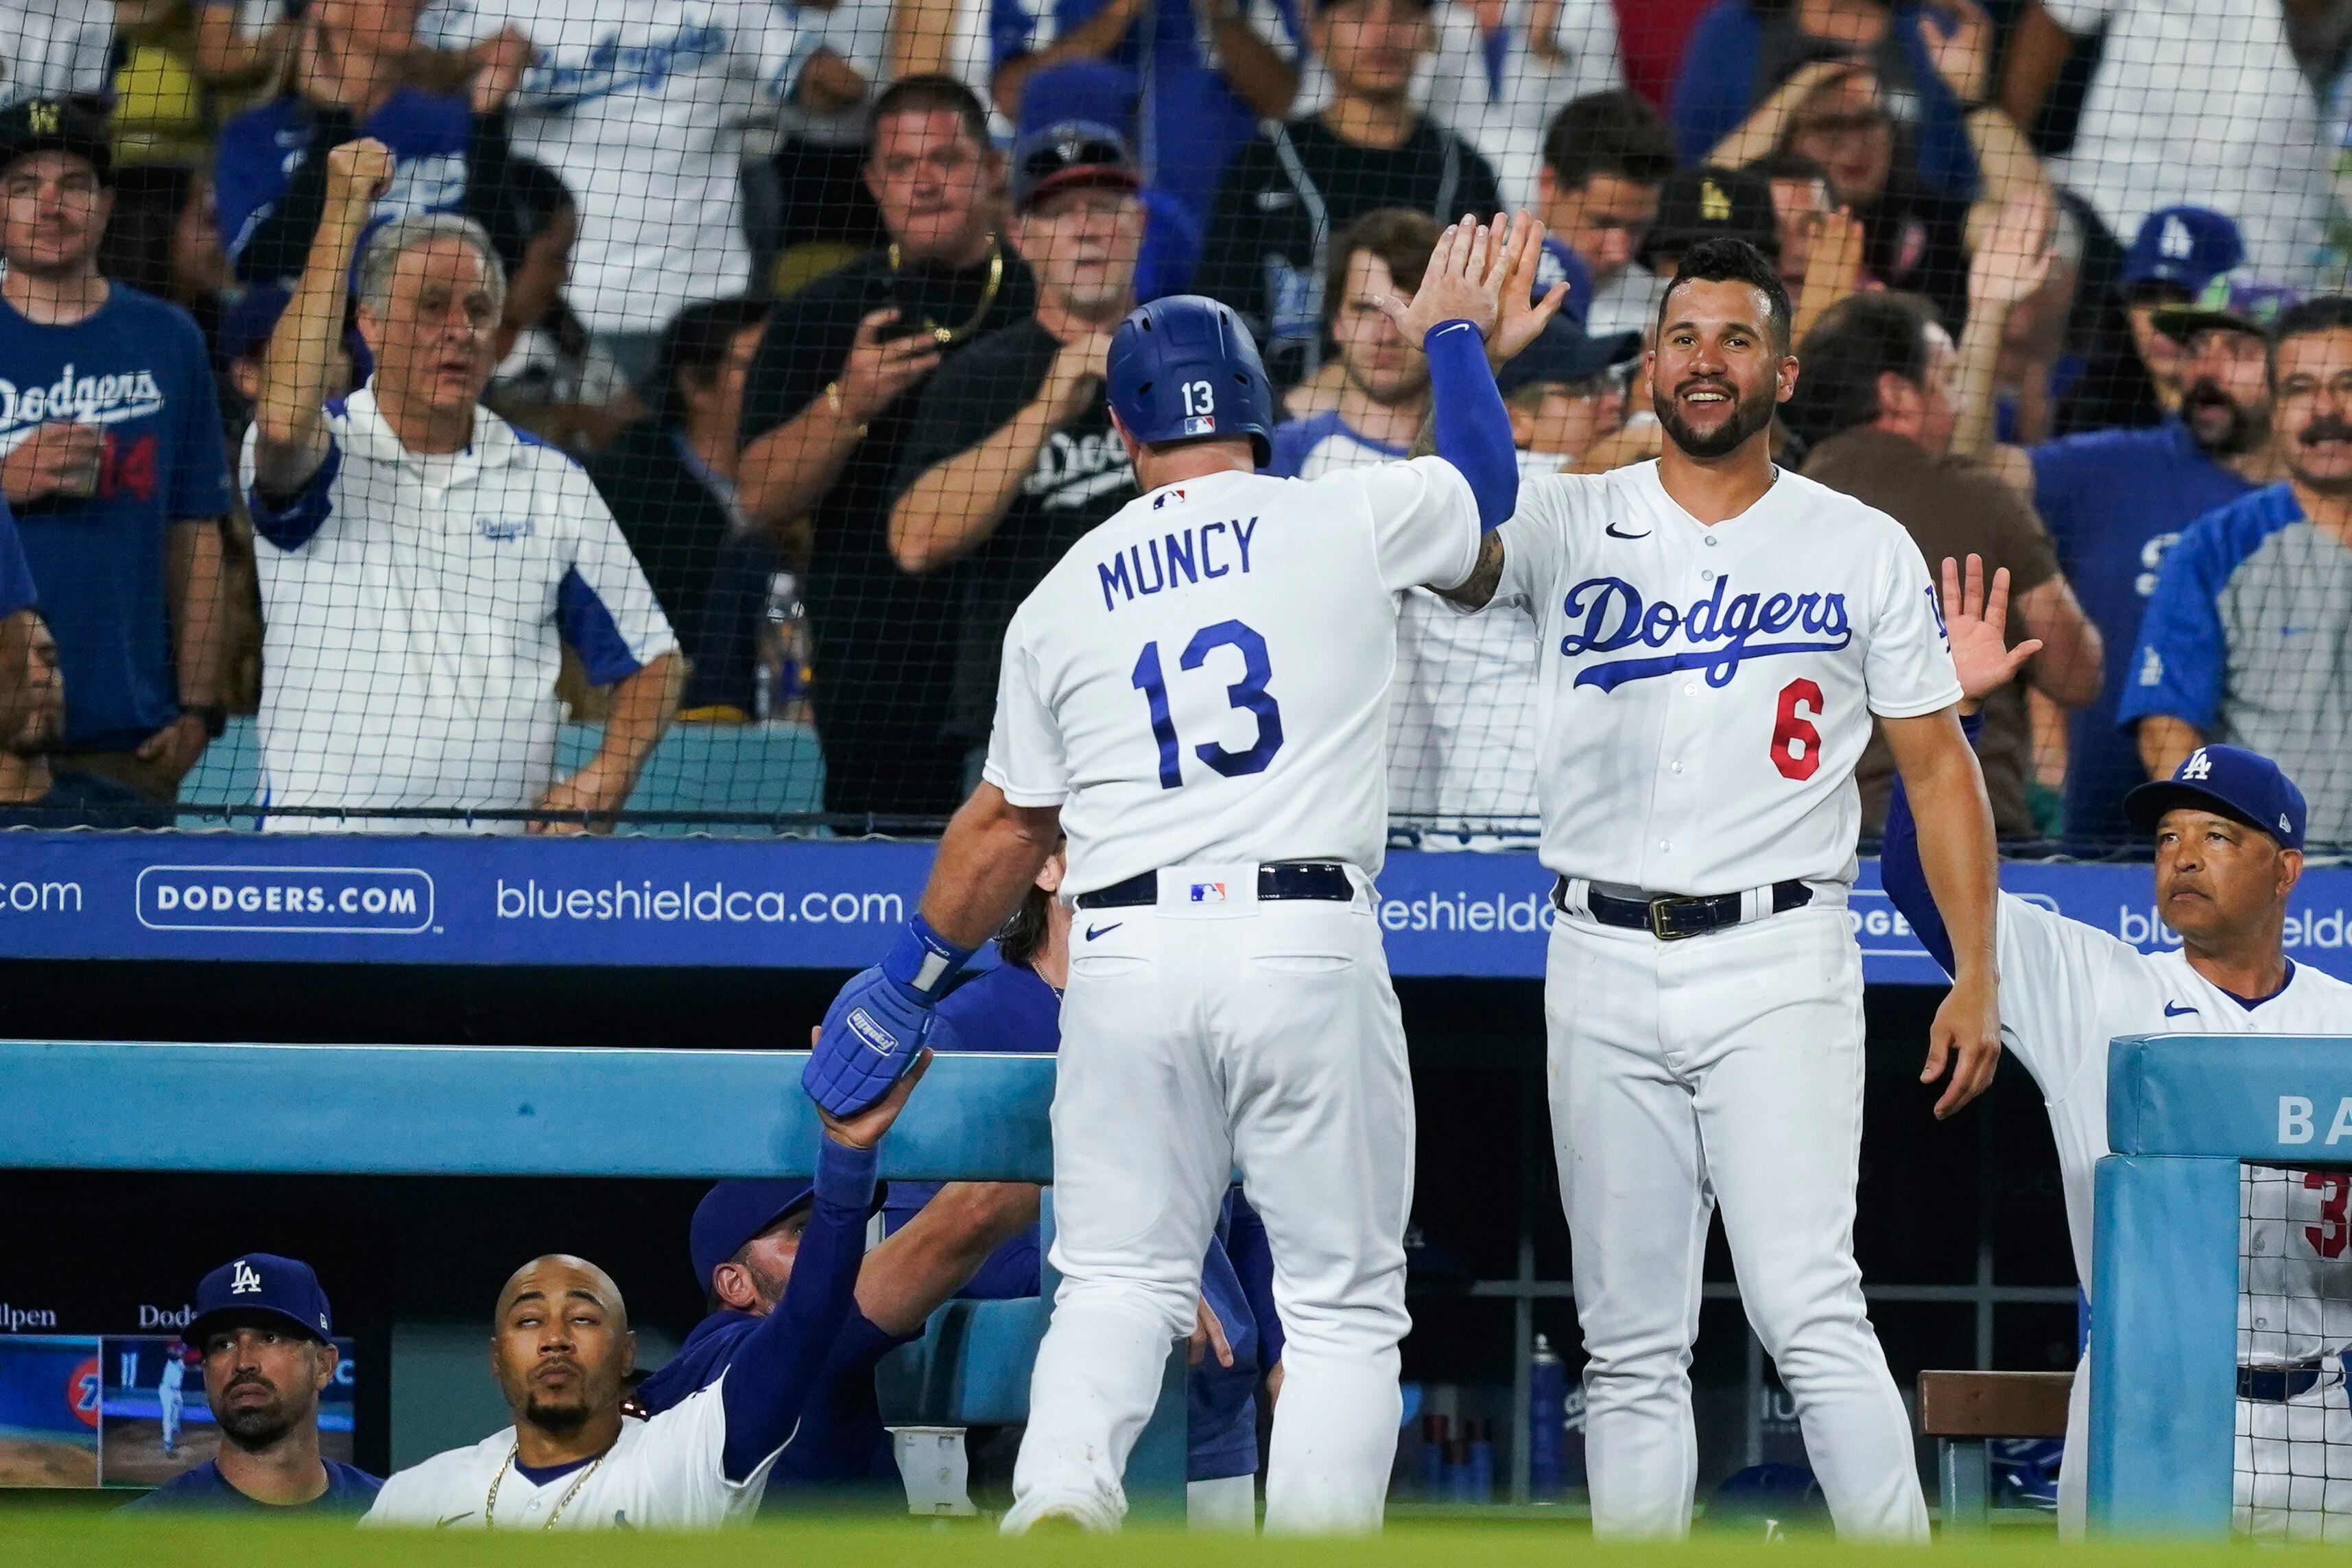 Dodgers win NL West for 10th time in 11 years with 6-2 win over